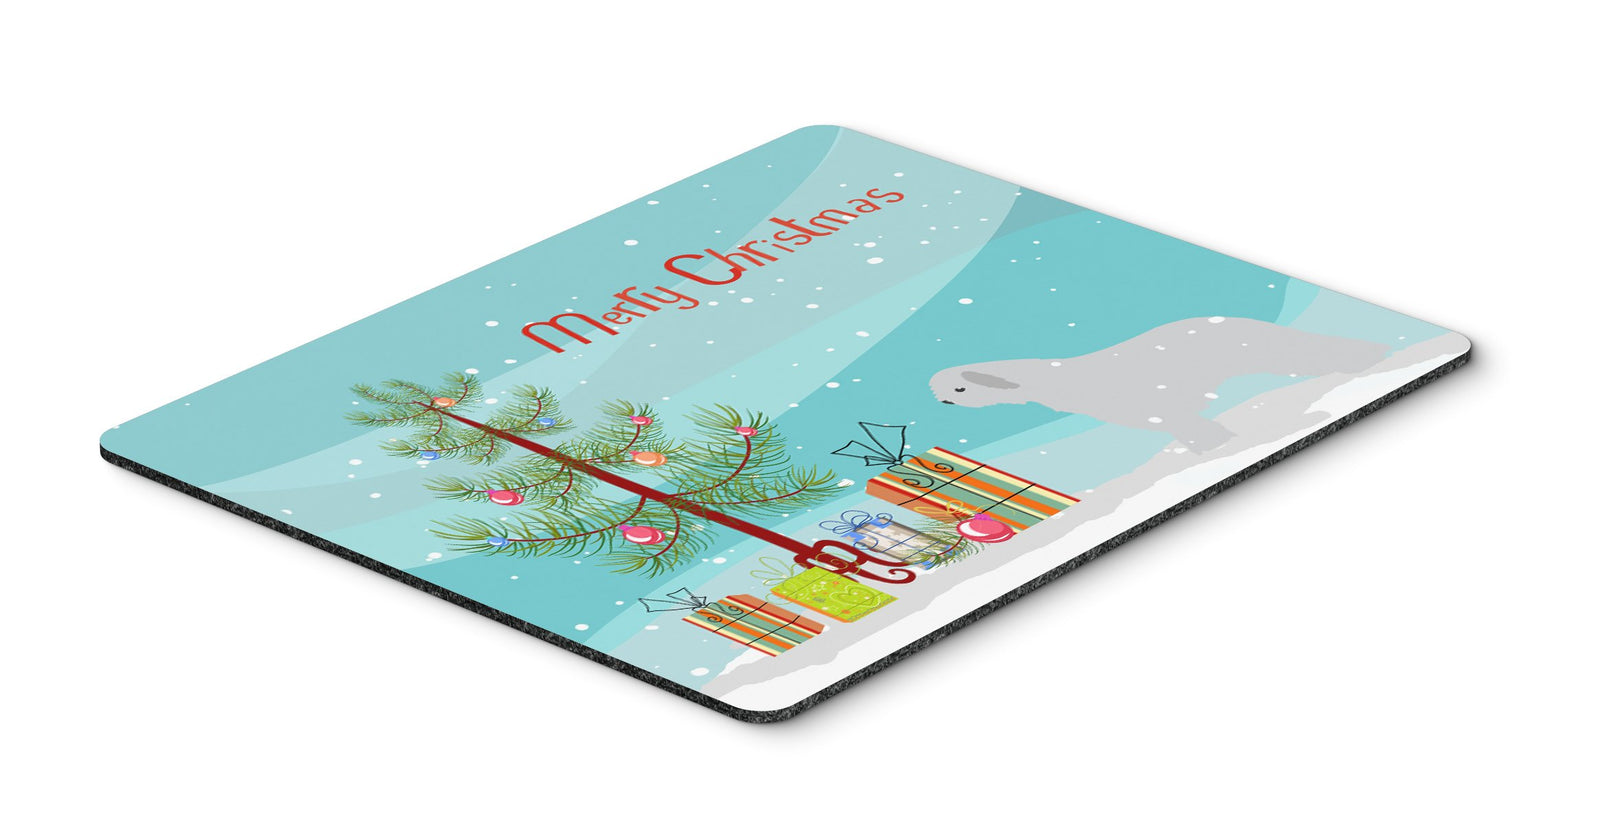 Spanish Water Dog Merry Christmas Tree Mouse Pad, Hot Pad or Trivet by Caroline's Treasures